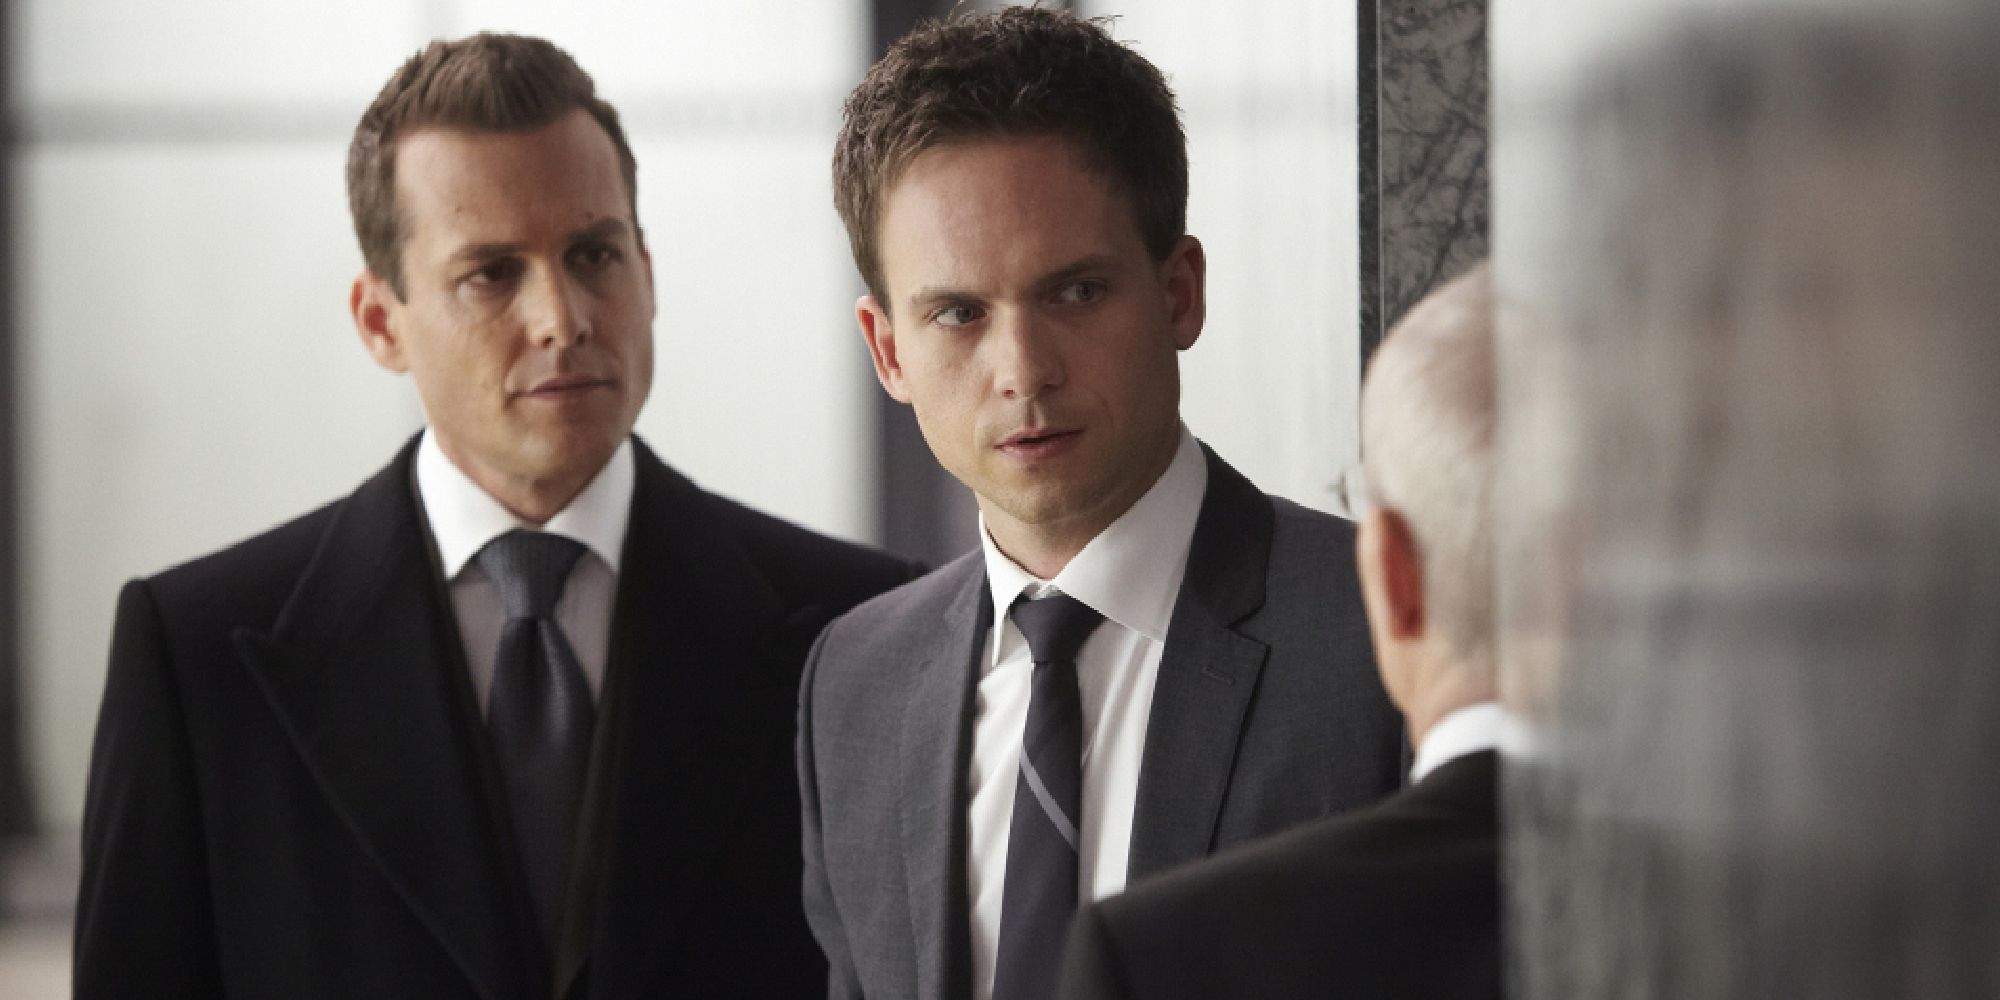 Mike Ross with Harvey Specter behind him with Suits 